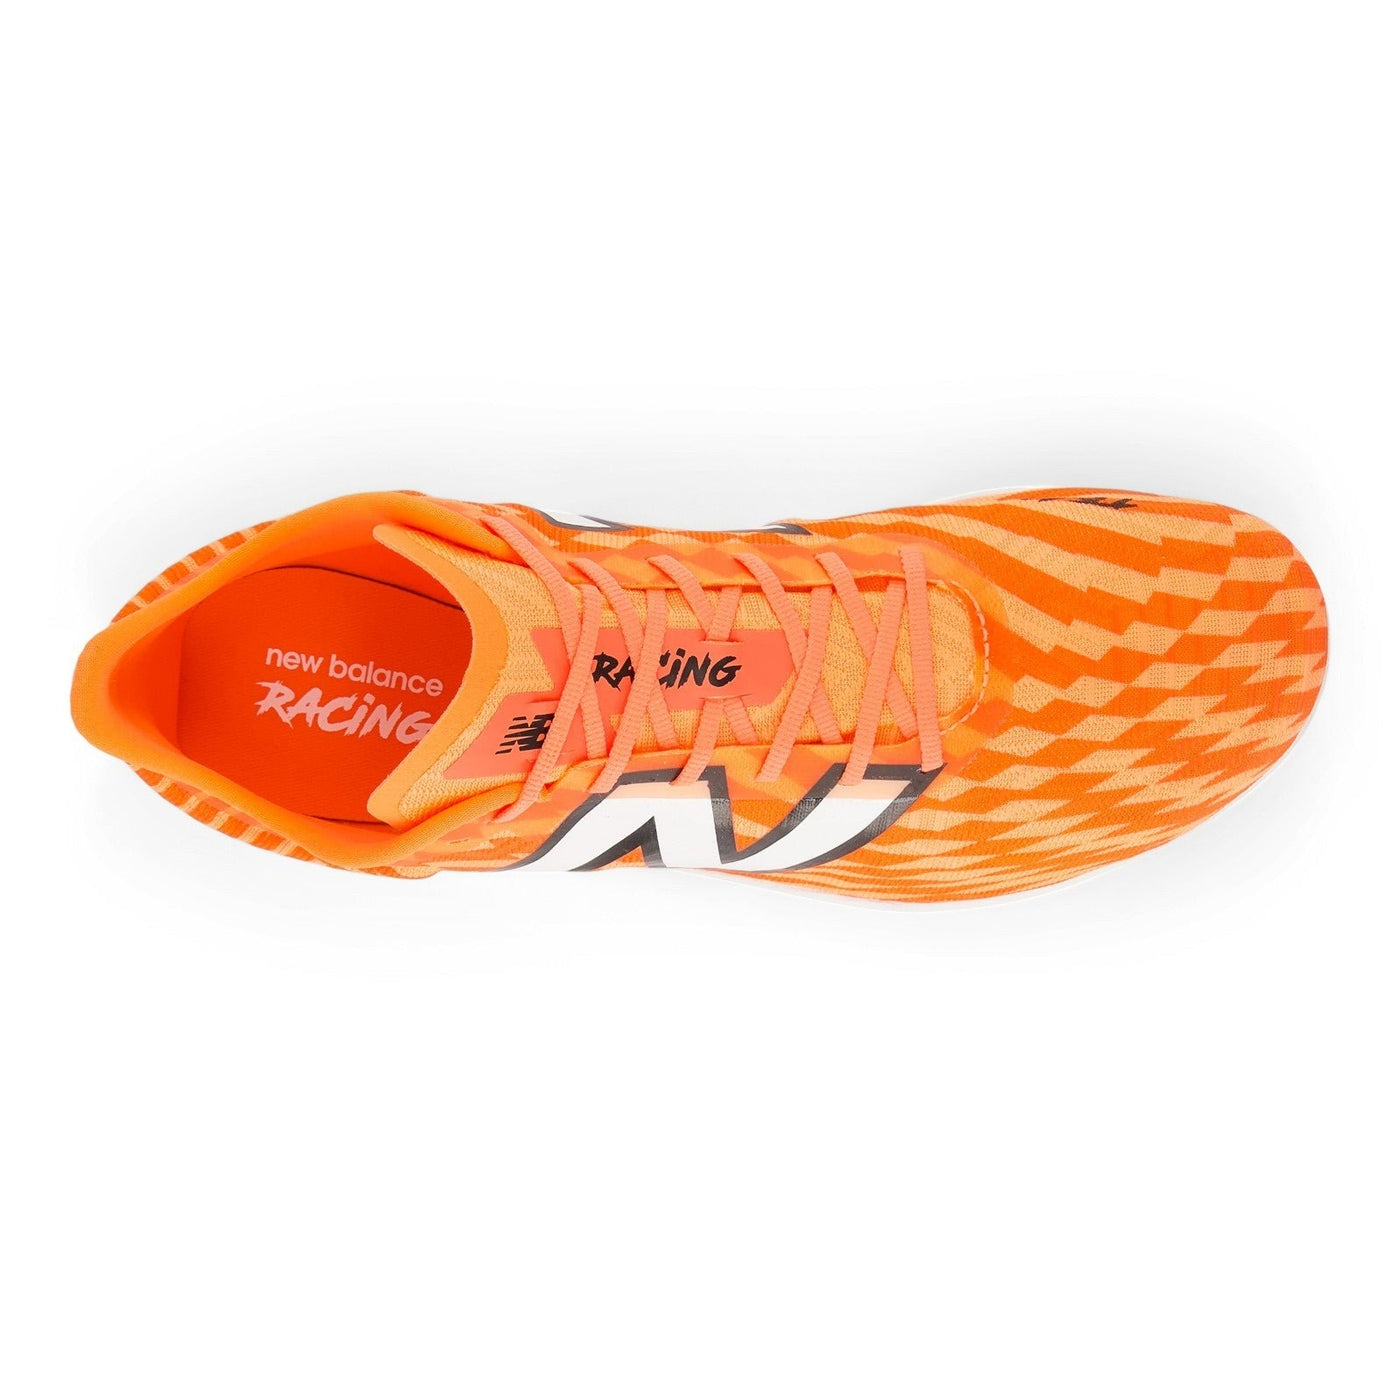 New Balance MD500 9 Middle Distance Spike